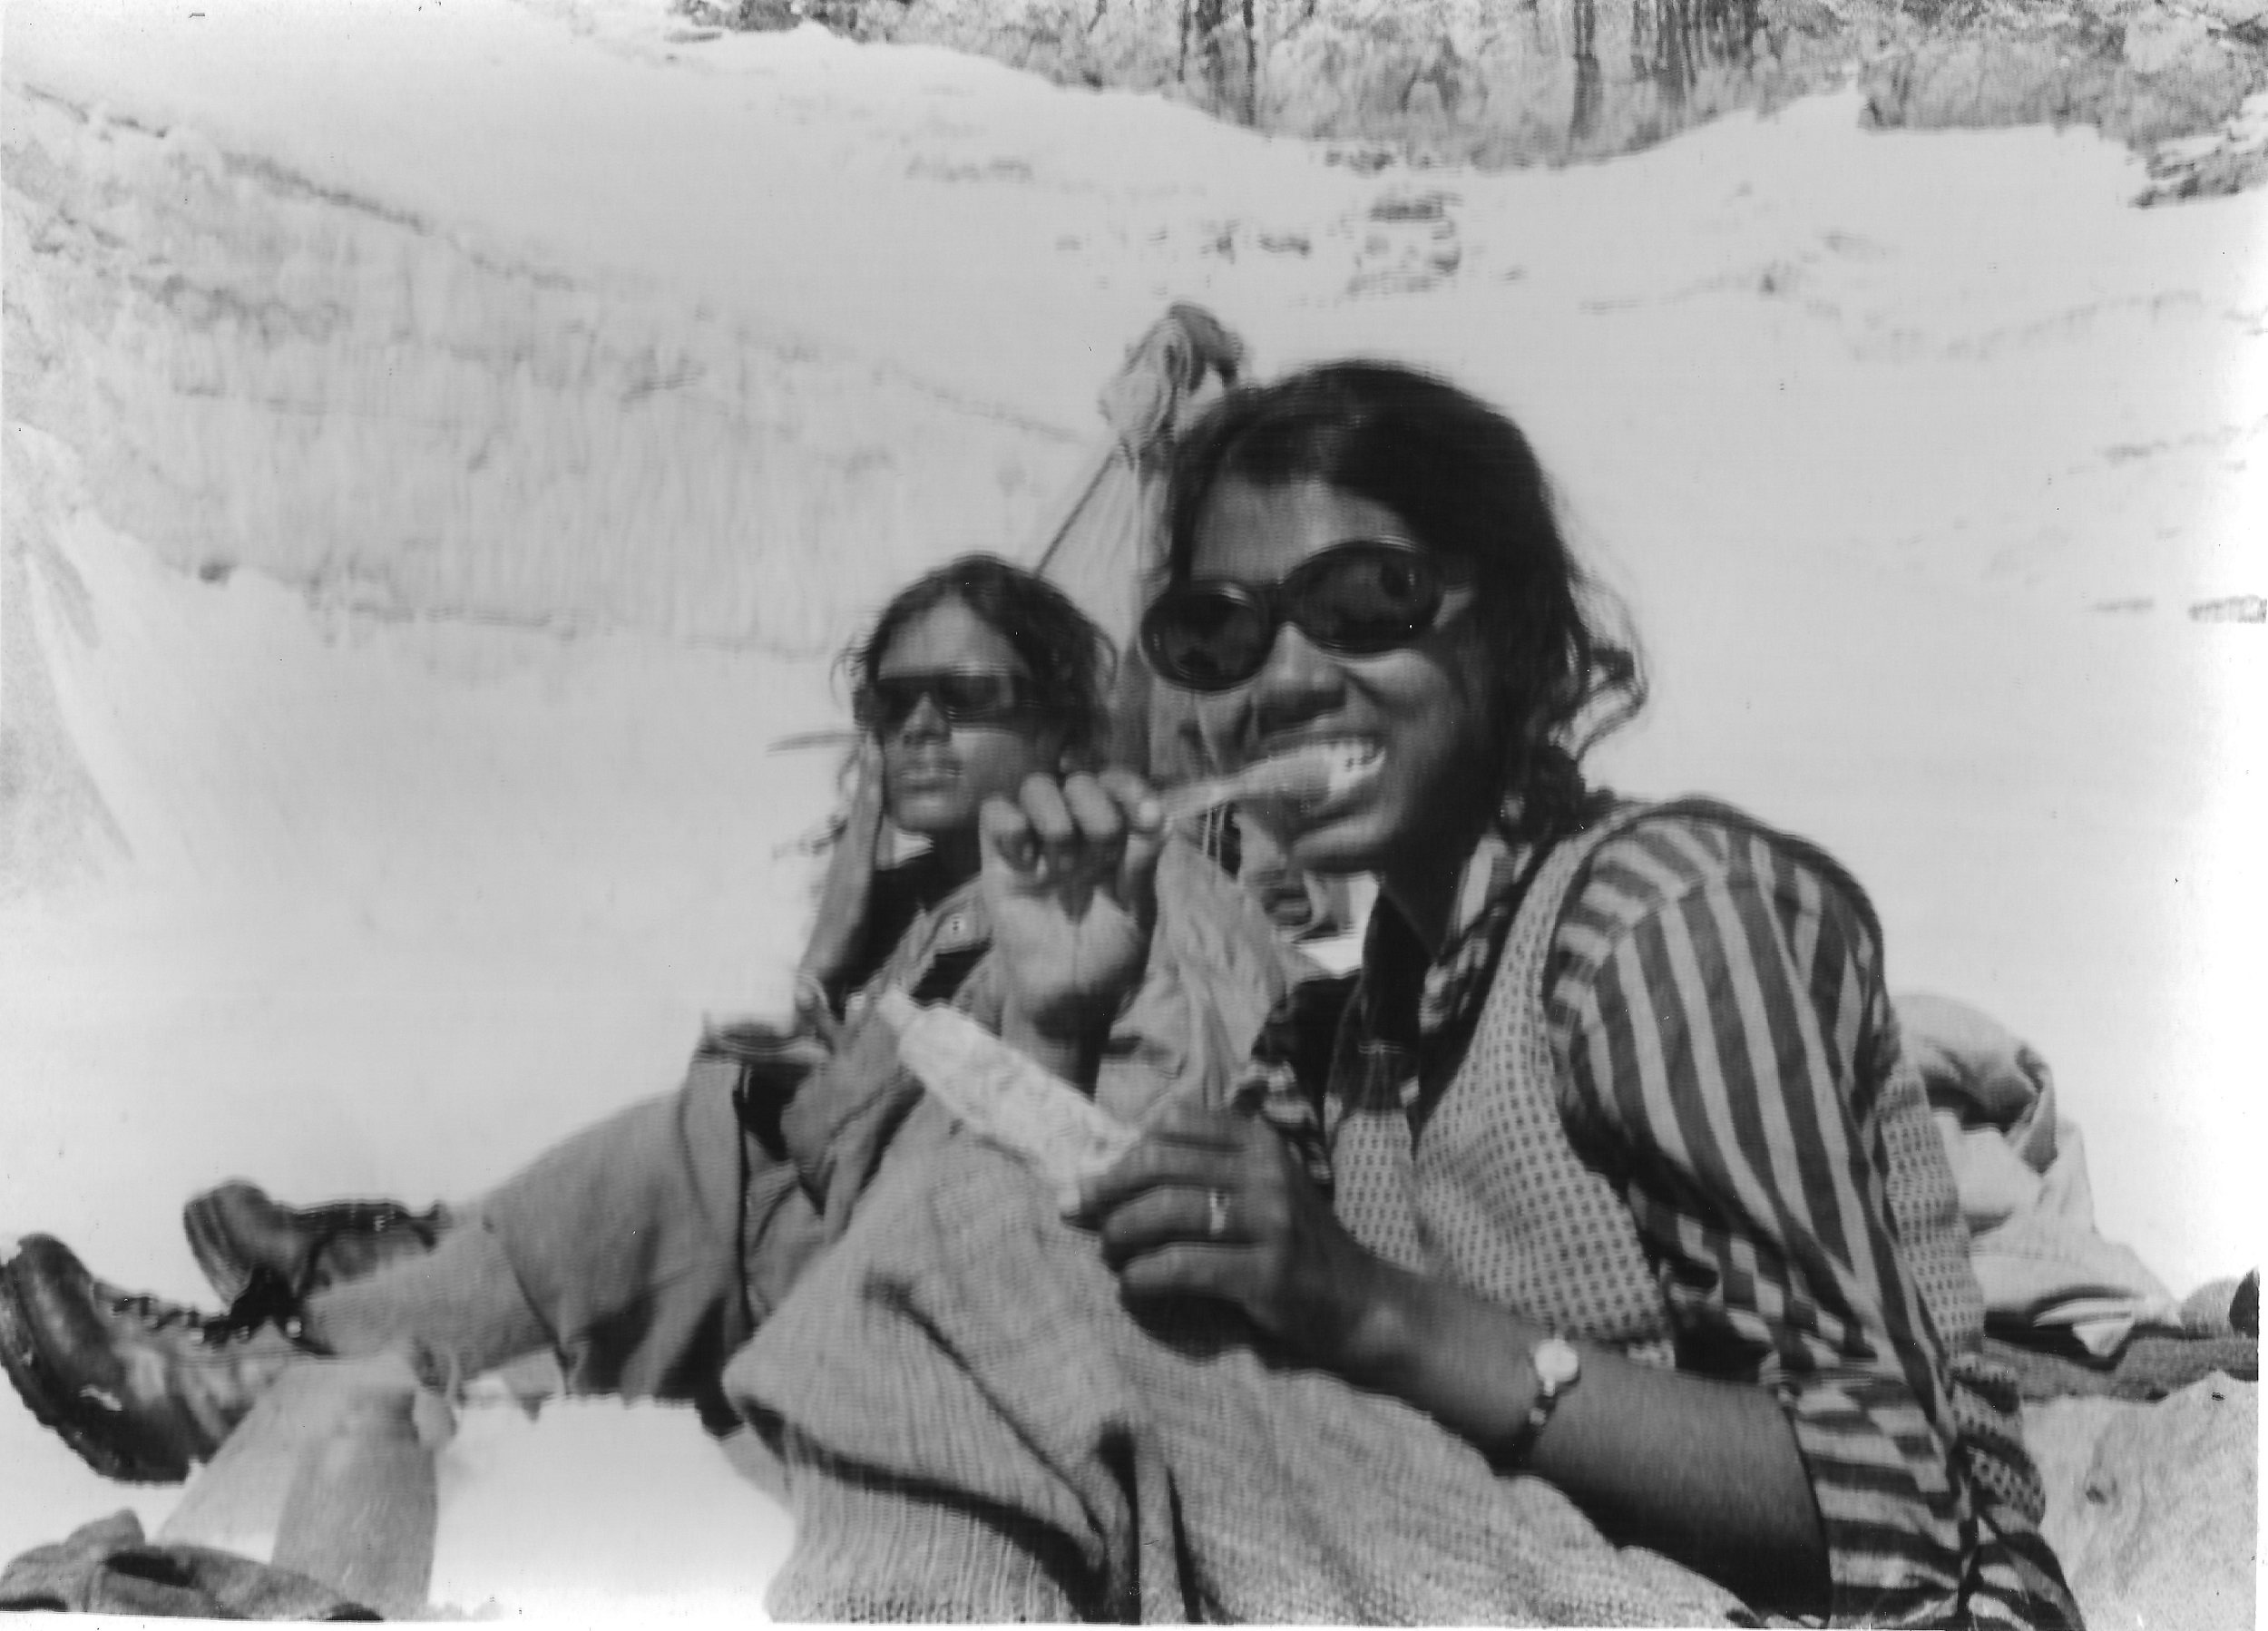 The expedition to climb Lalana was an adventure that none of the people on it would forget; Sudipta (right) and Kamala [image by: Sudipta Sengupta]